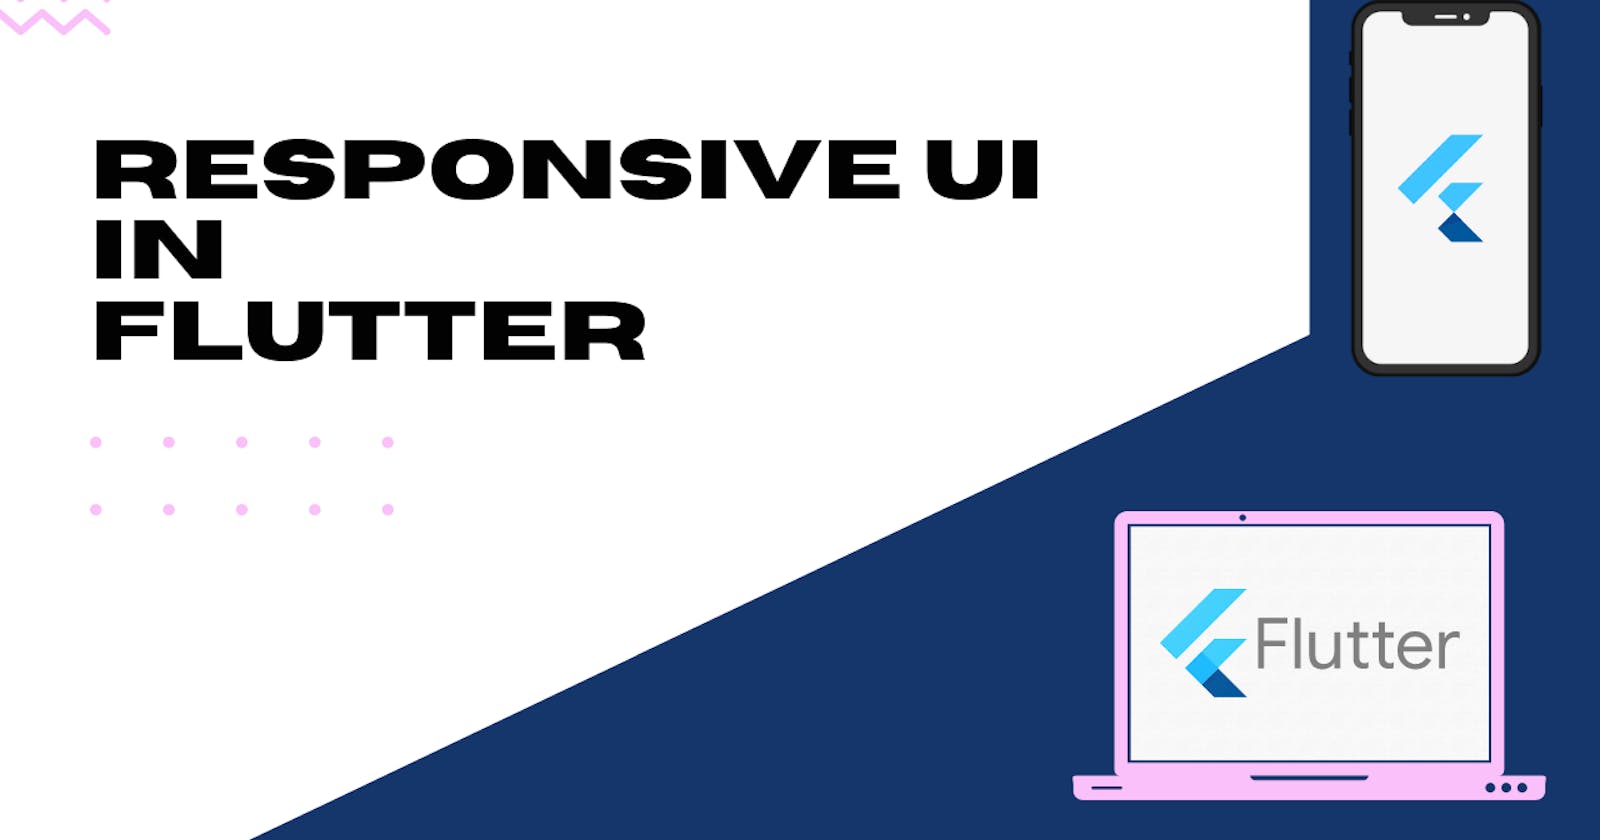 How to build Responsive UI for Web and Mobile in Flutter? A complete guide.